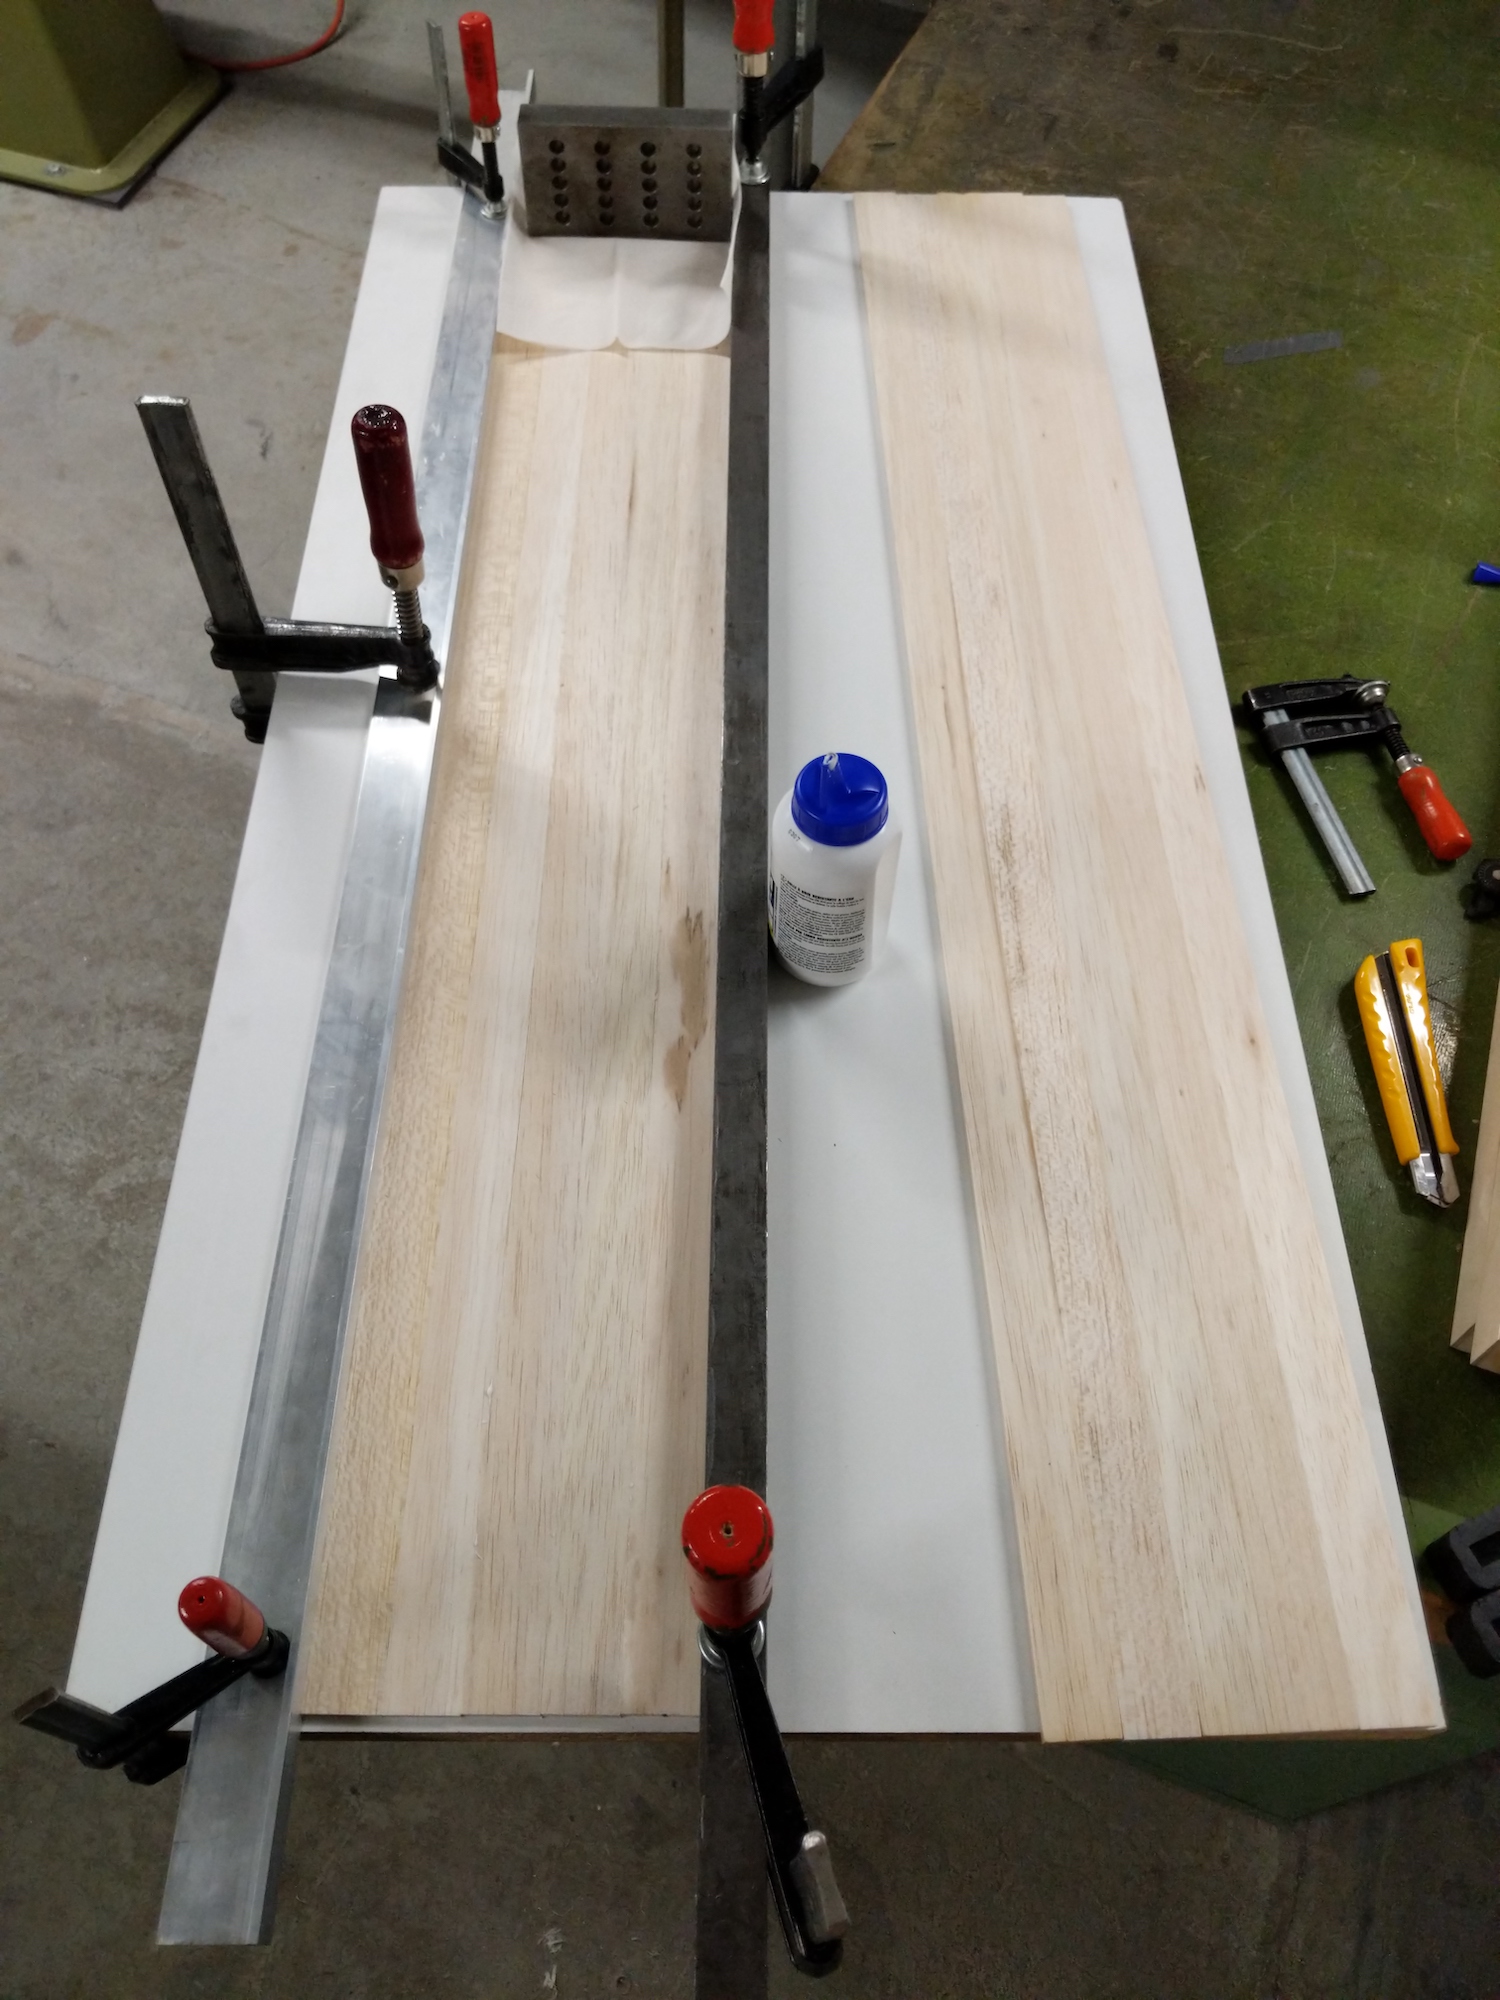 Gluing of the balsa bars to form the deck of the surfboard